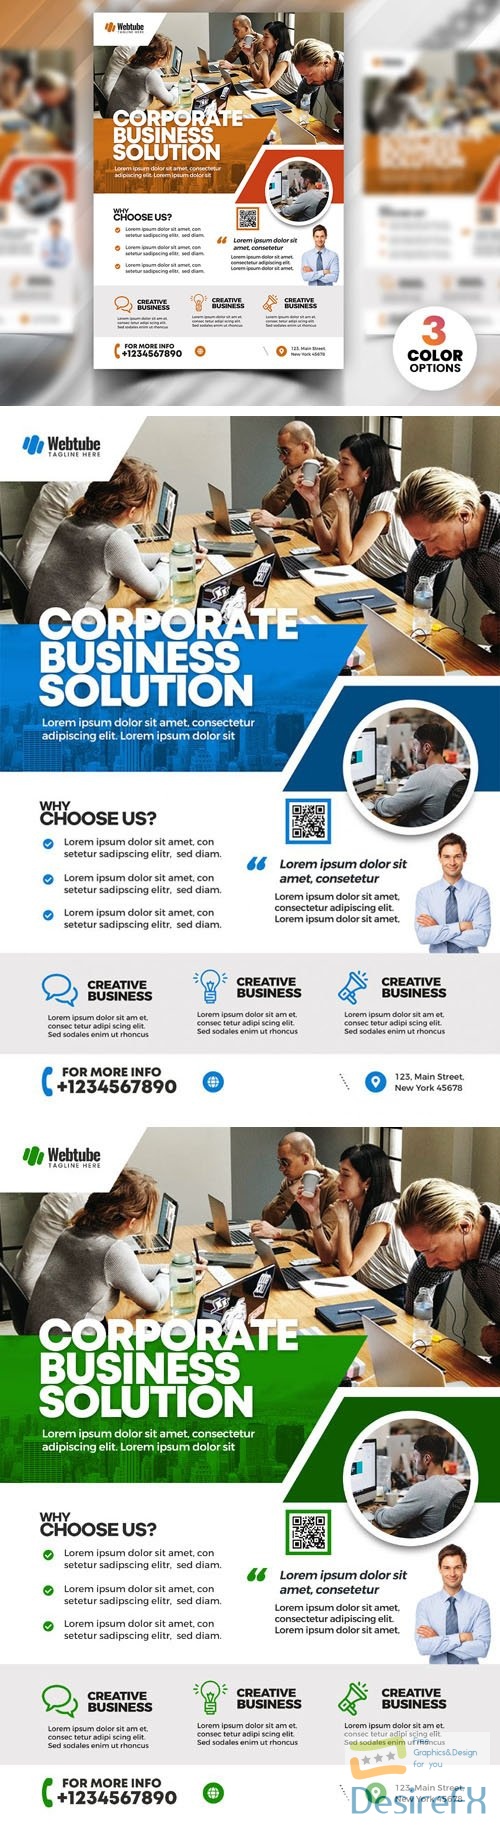 Professional Corporate Business Solution A4 Flyers PSD Templates